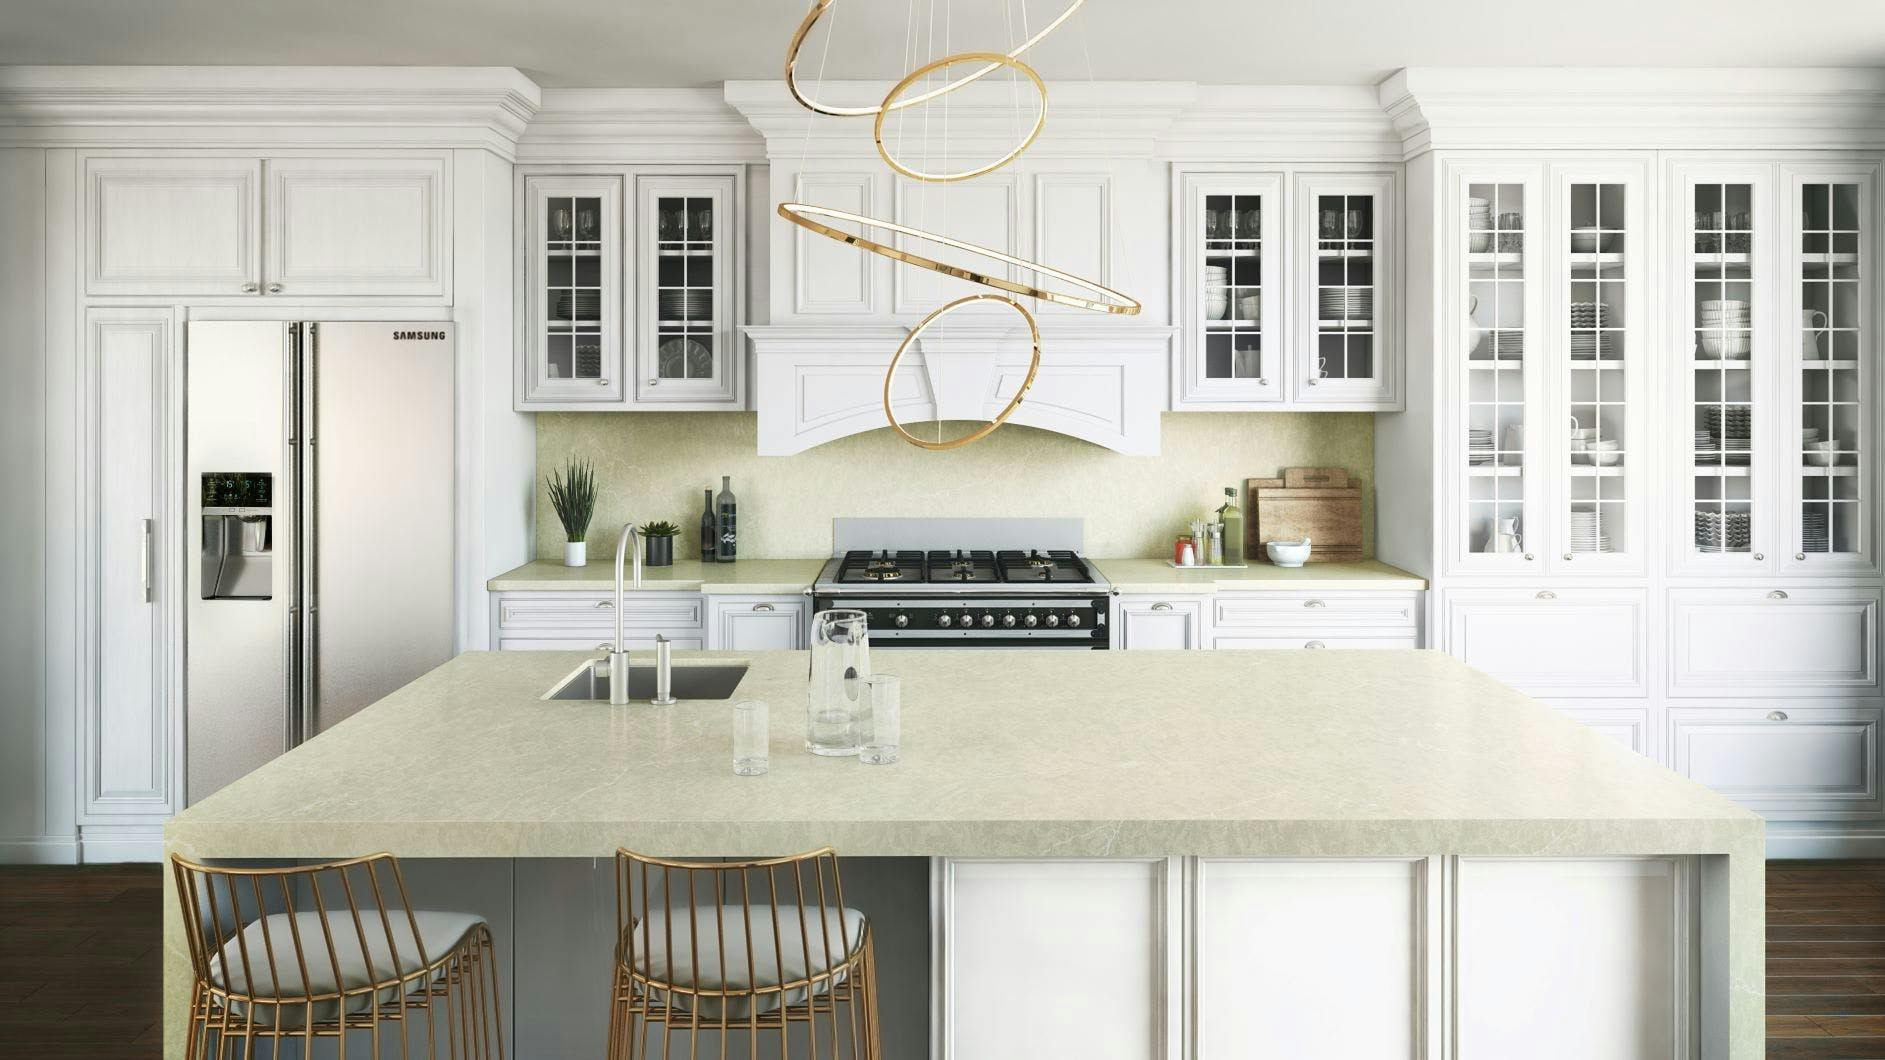 Image 35 of Silestone Silken Pearl Kitchen 1 in New additions to "Eternal", the best-selling Silestone® colour collection - Cosentino